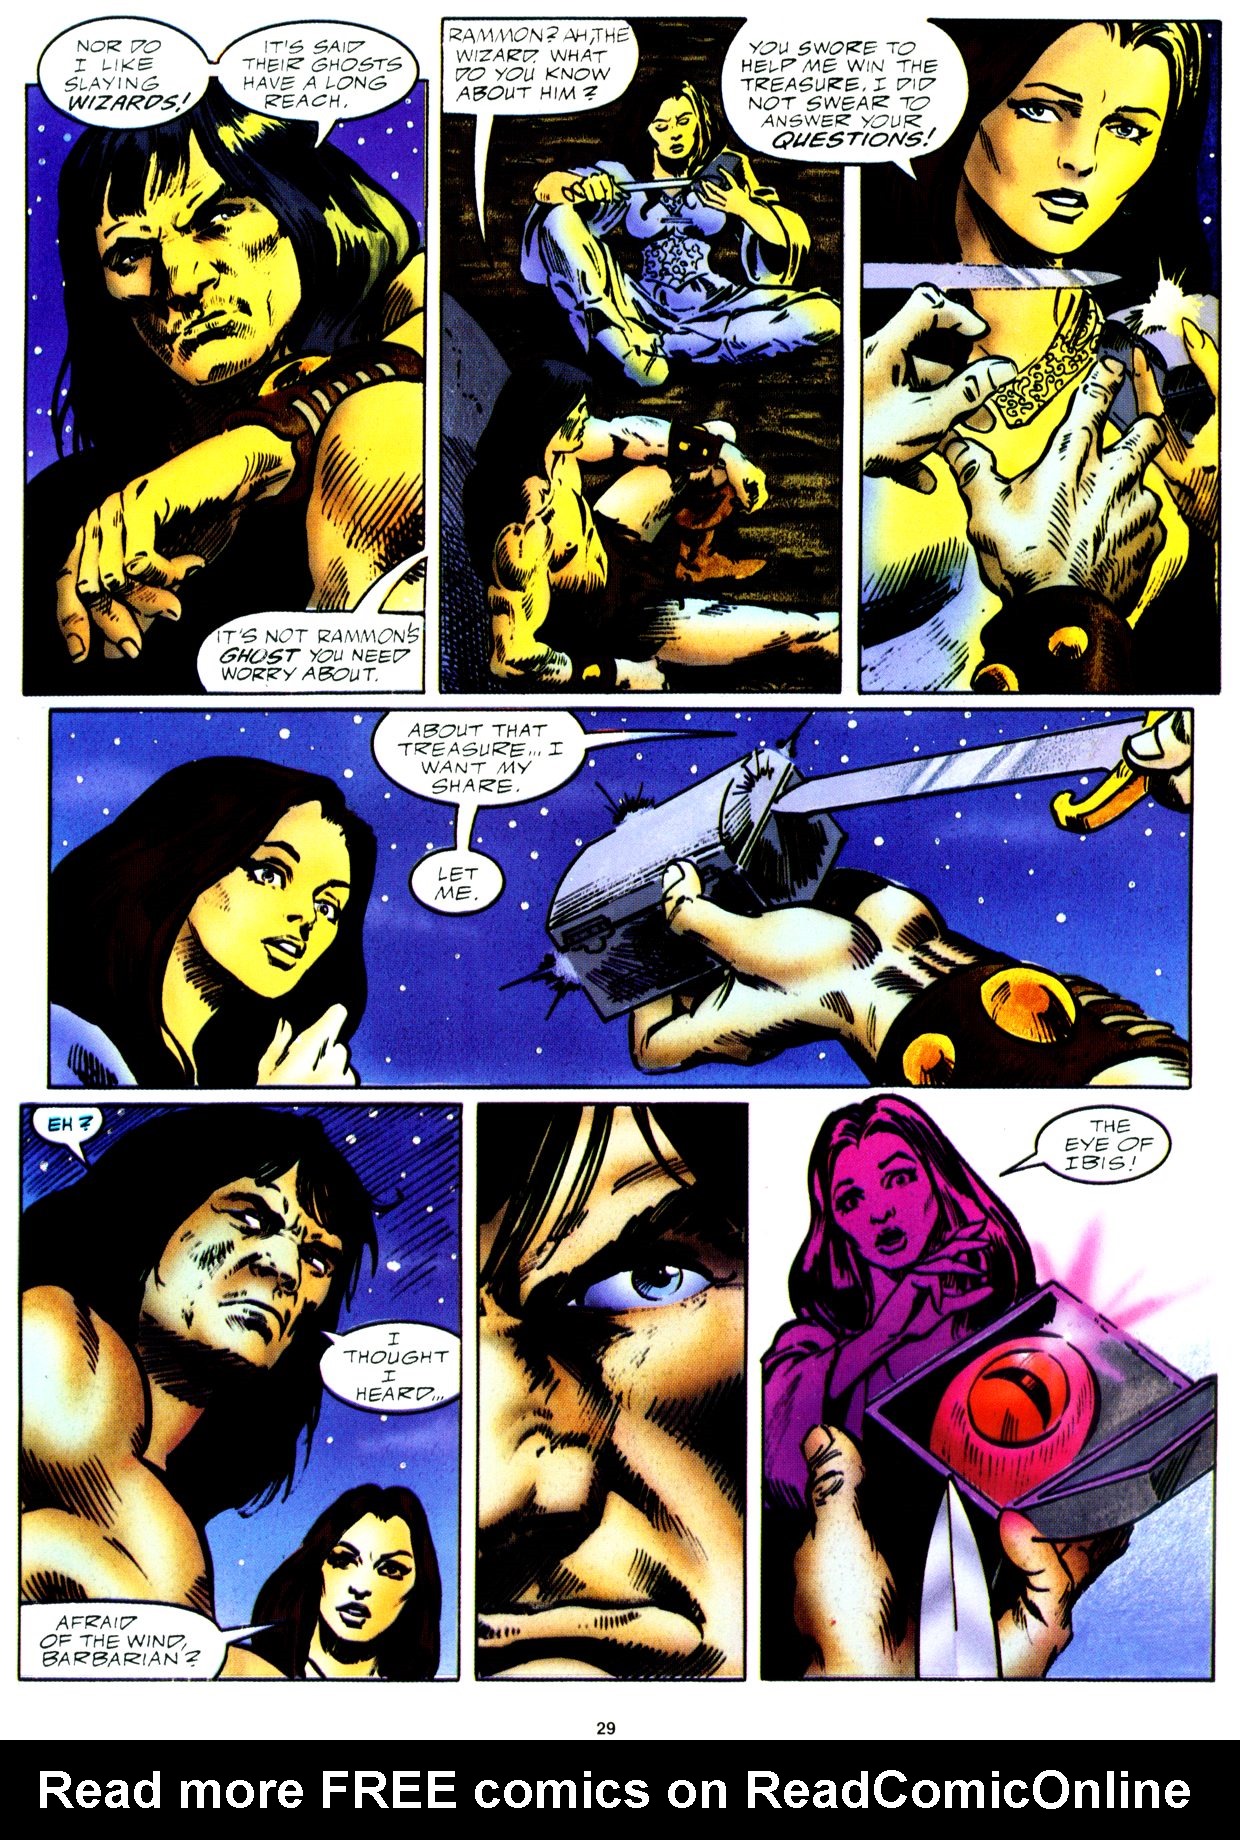 Read online Marvel Graphic Novel comic -  Issue #59 - Conan - The Horn of Azoth - 29